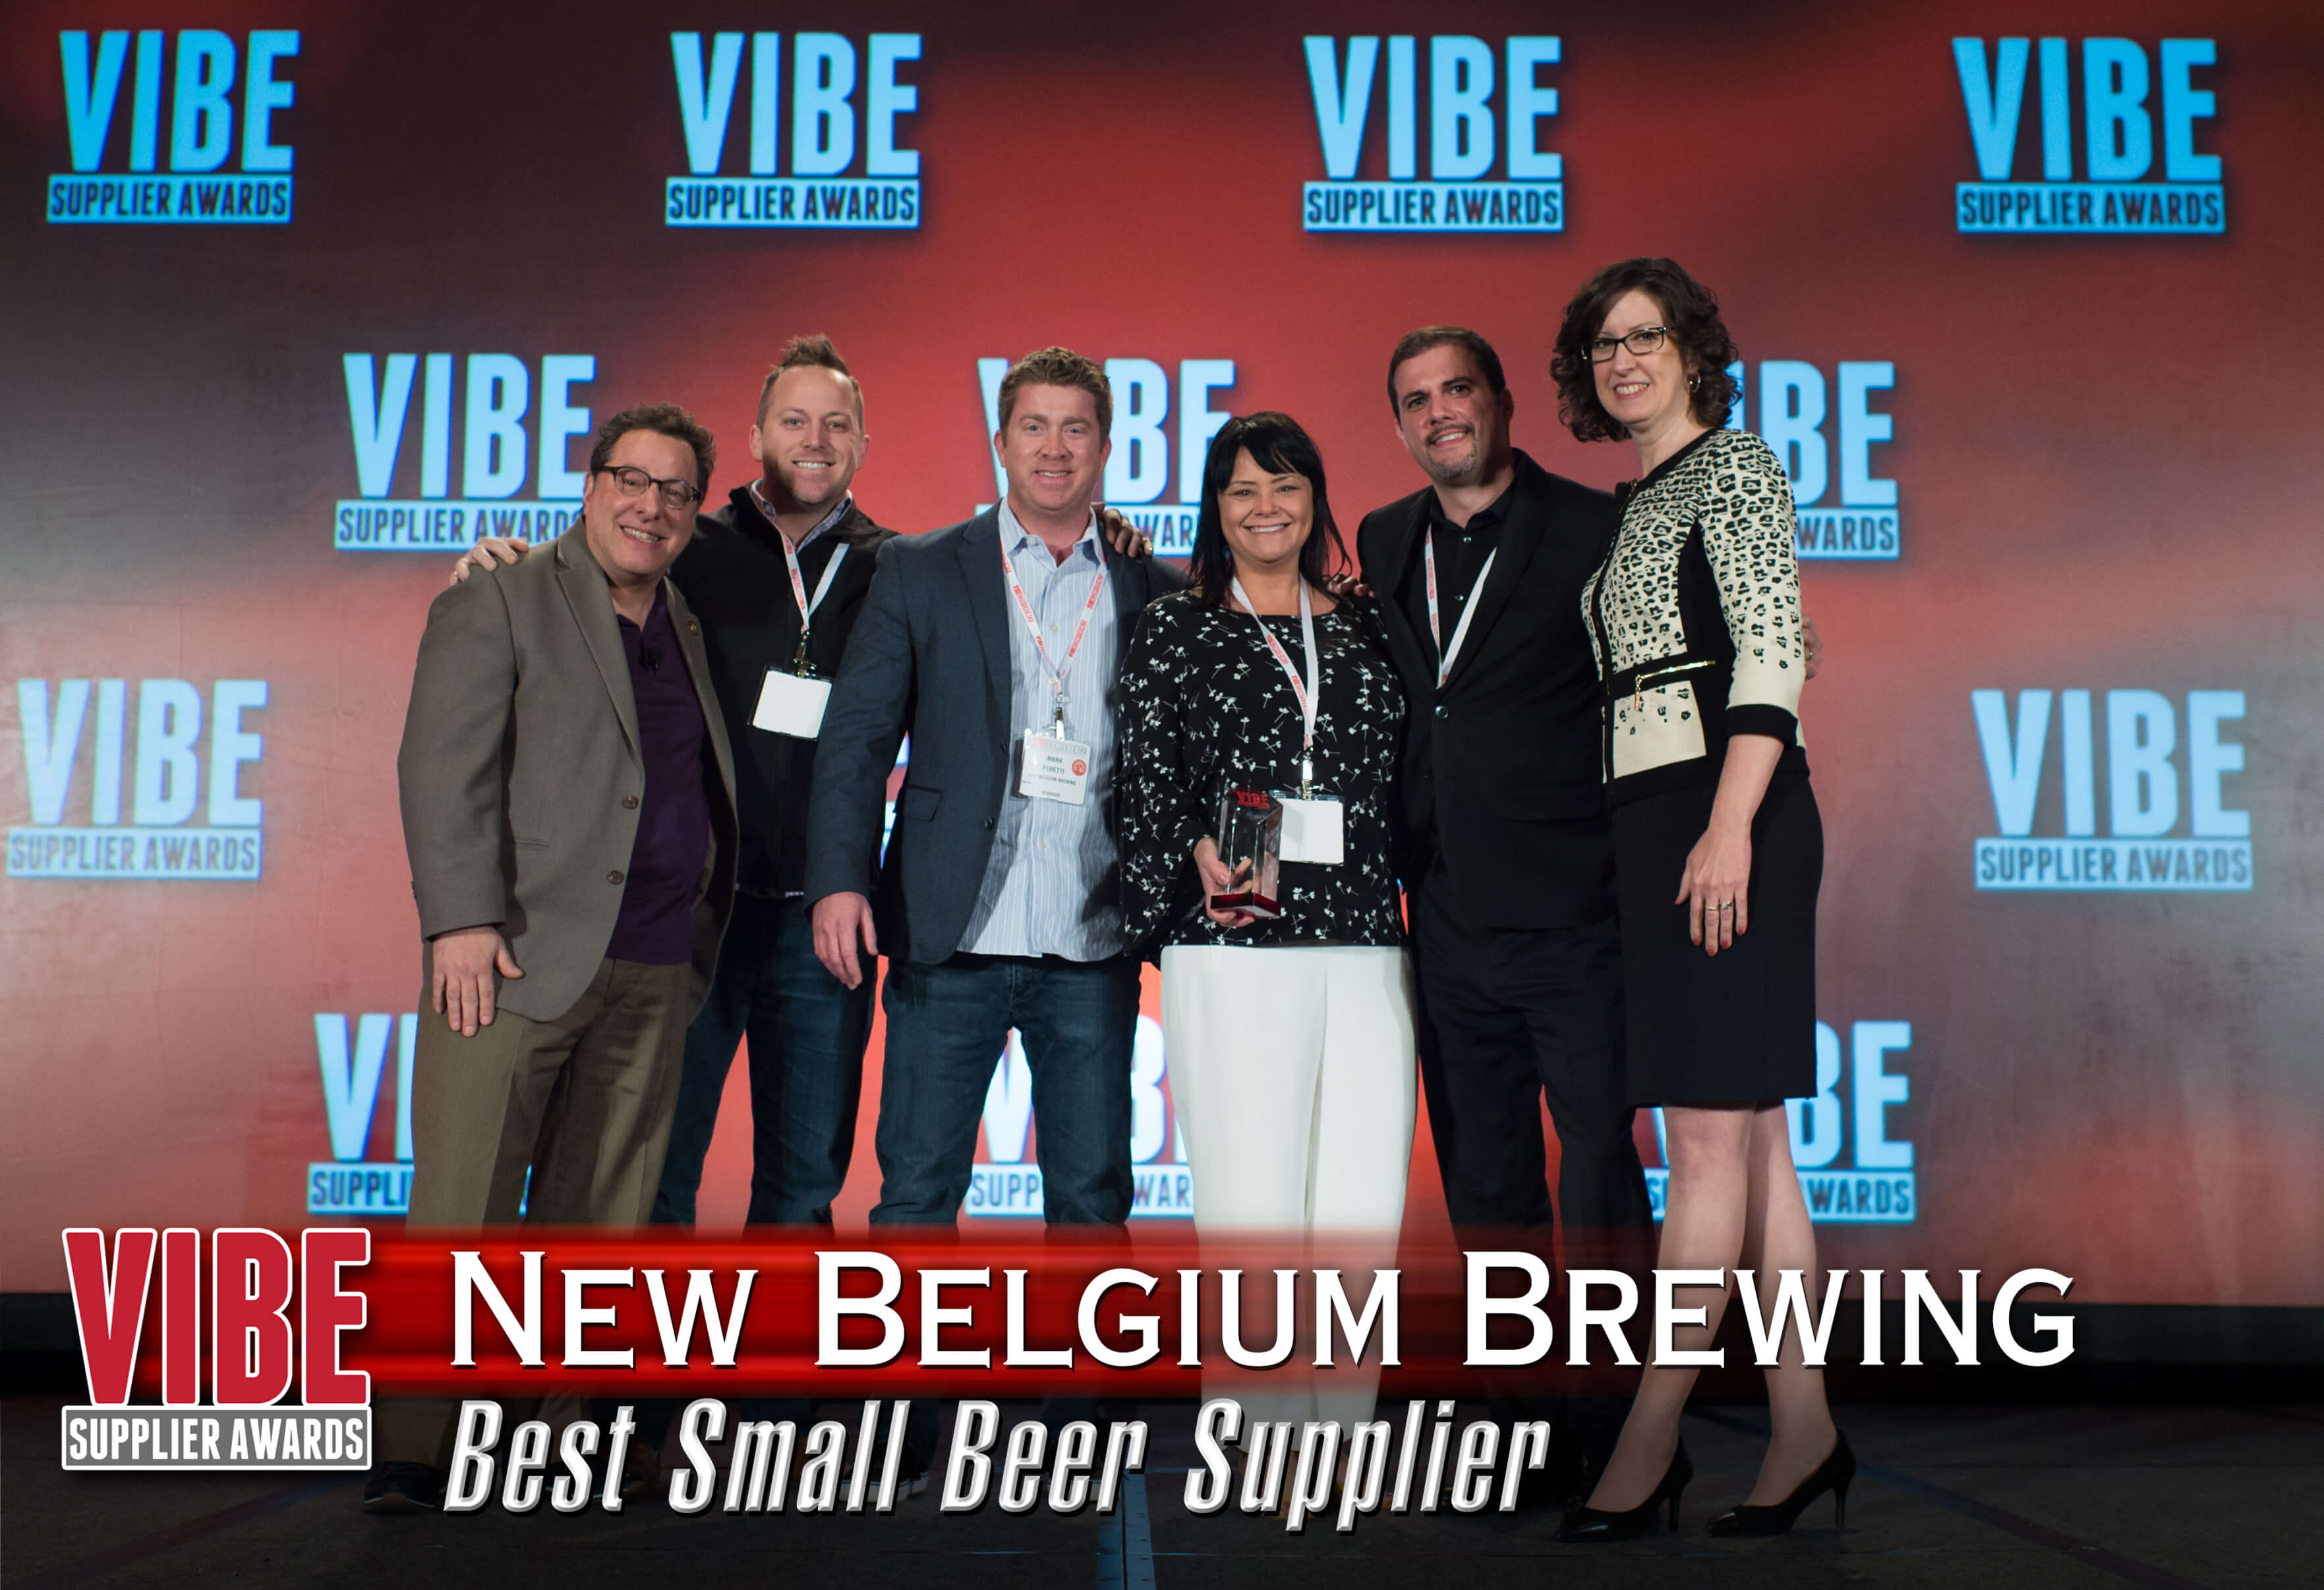 2018 VIBE Supplier Award for Best Small Beer Supplier to New Belgium Brewing